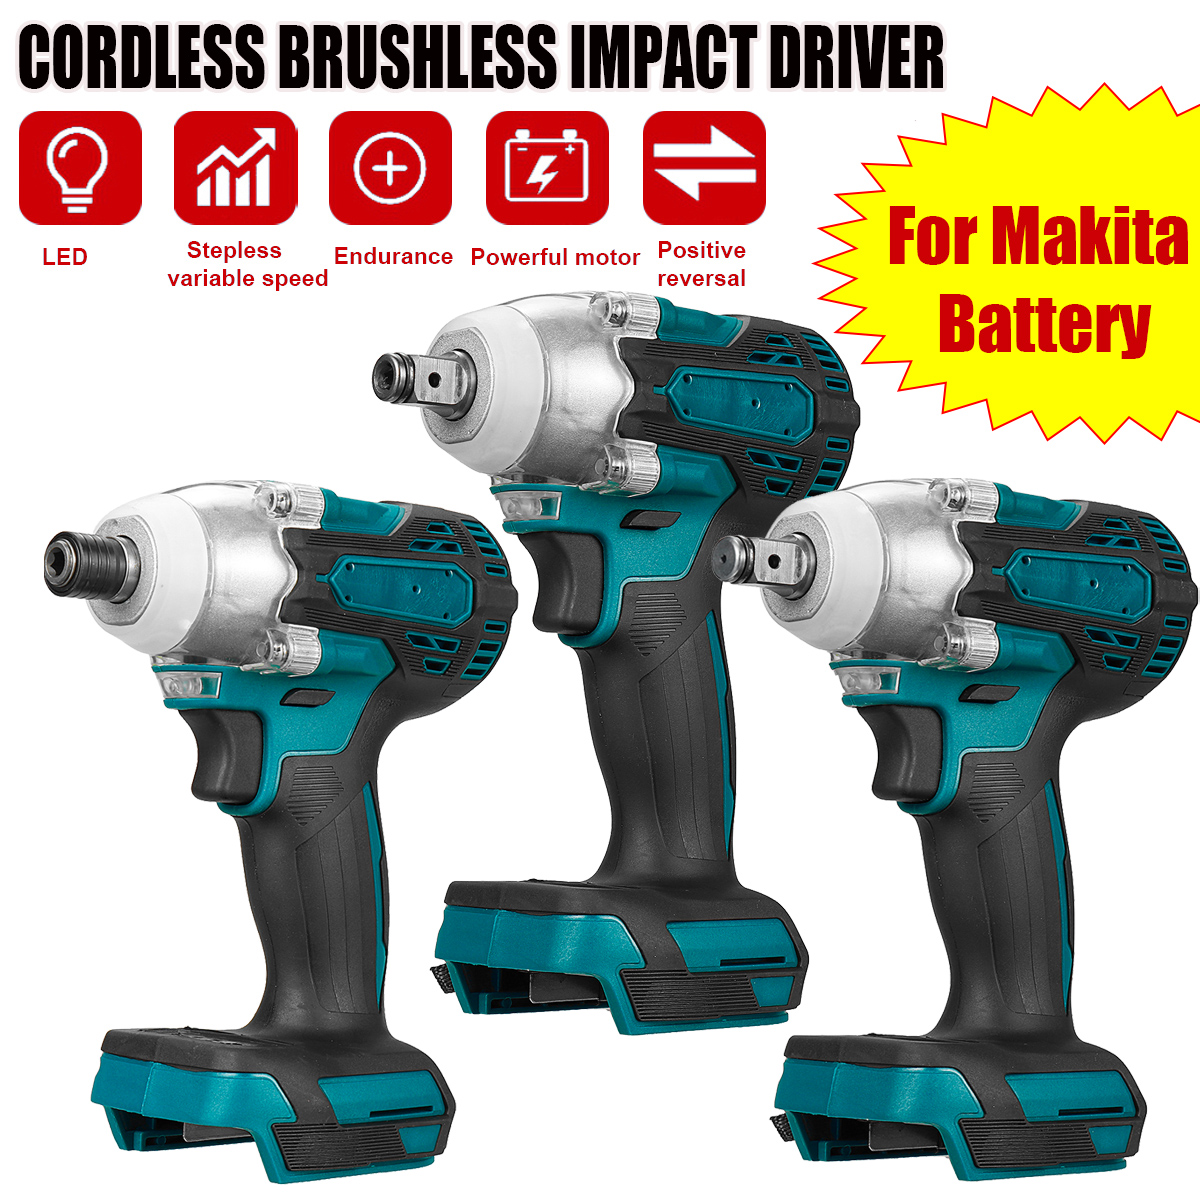 125mm-Cordless-Brushless-Impact-Wrench-Drill-Drive-Screwdriver-Power-Tool-For-Makita-18V-battery-1855969-1